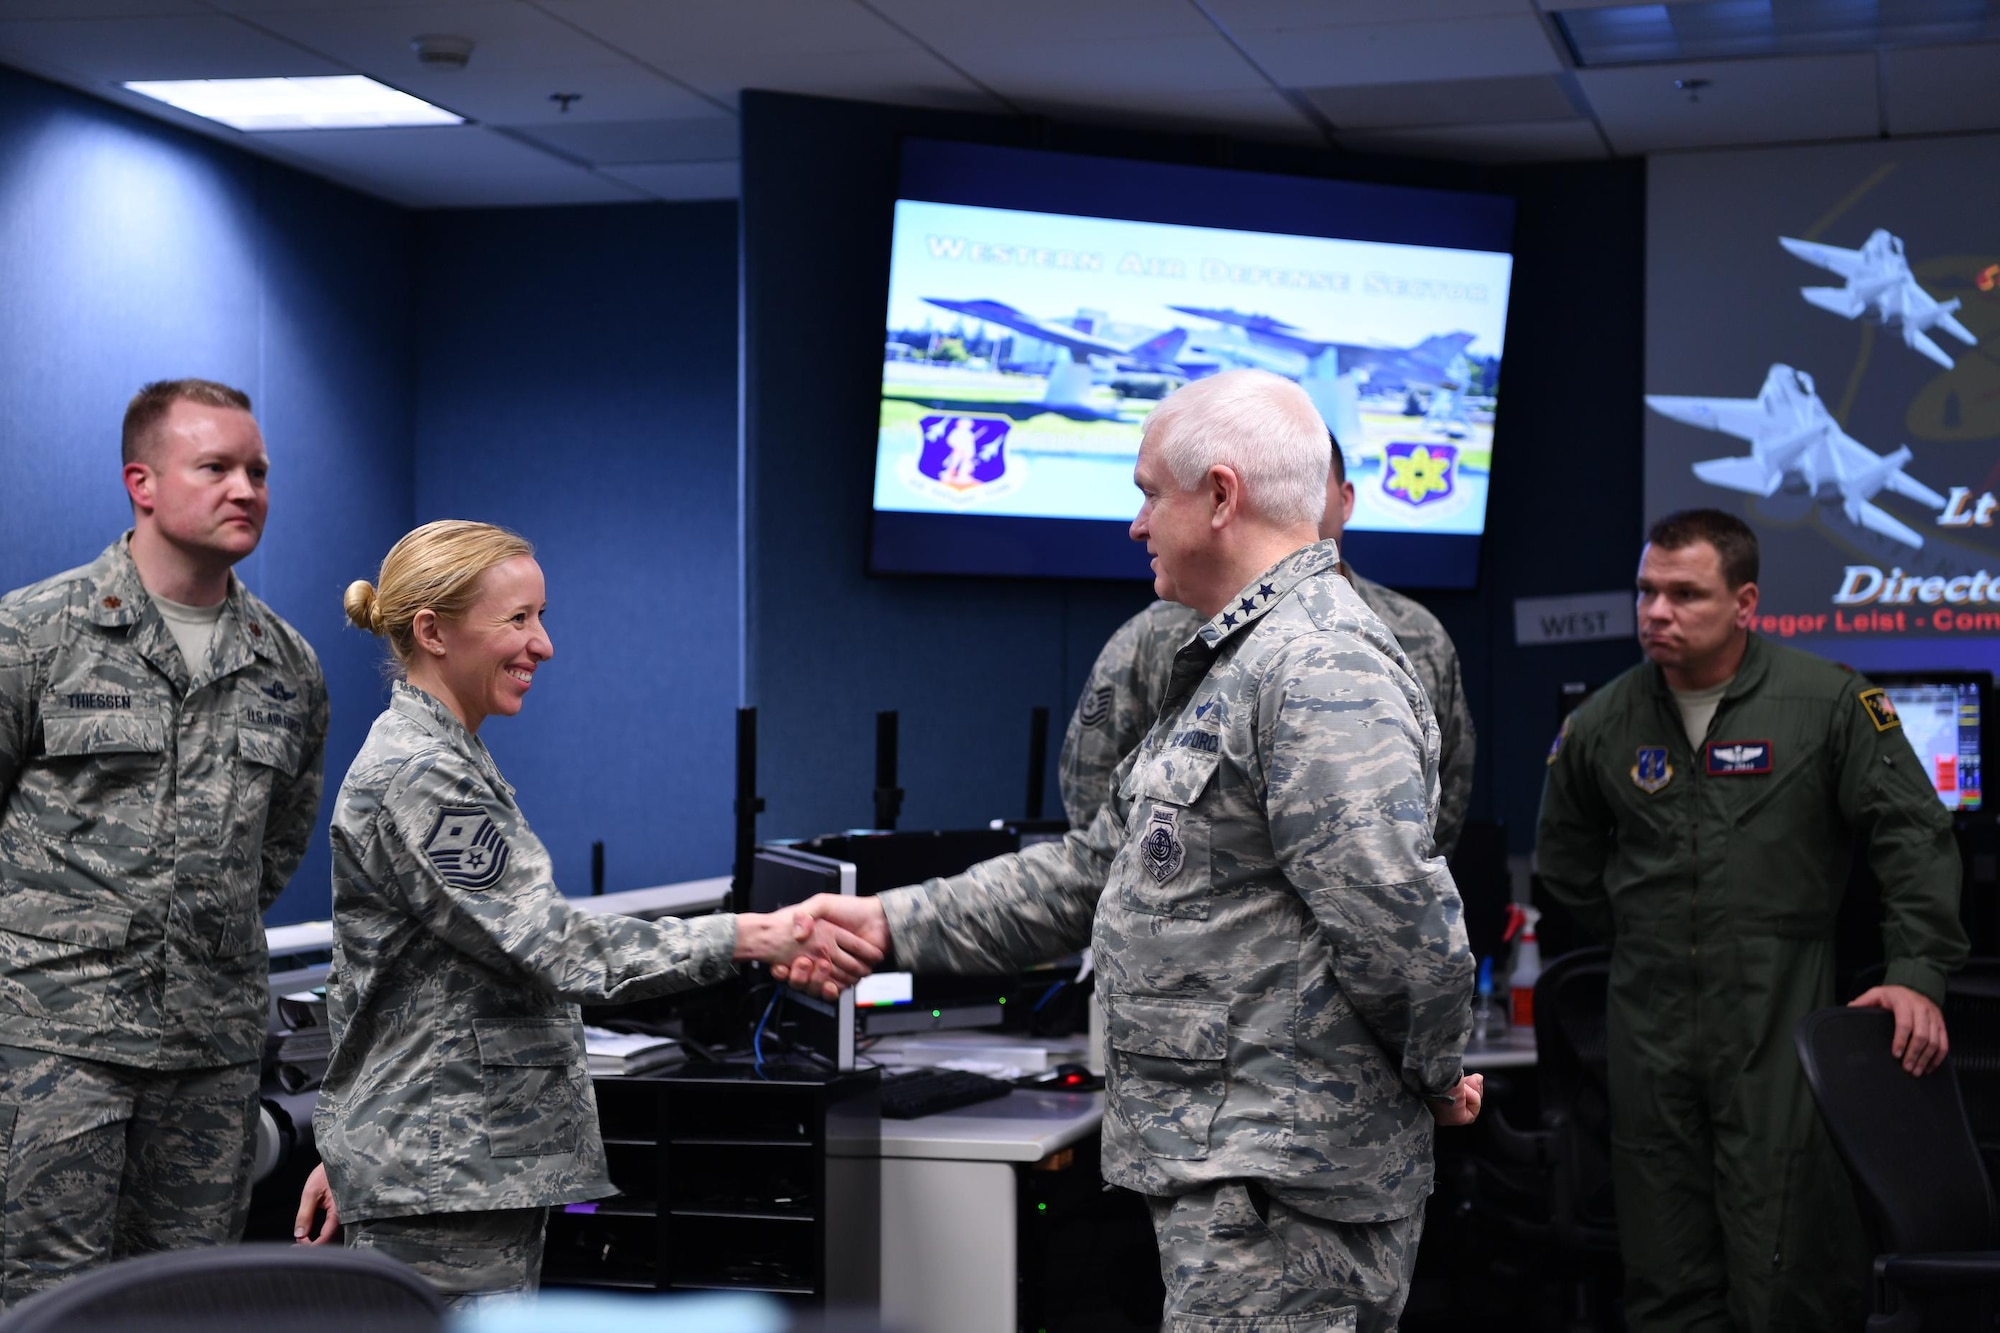 Lt. Gen. L. Scott Rice, Director of the Air National Guard, recognizes 
Master Sgt. Dawn Kloos, 225th Air Defense Group, for recently being named the First Air Force First Sergeant of the Year.  Rice spent the day visiting two Washington Air National Guard units:  the Western Air Defense Sector at Joint Base Lewis-McChord and the 194th Wing at Camp Murray. (U.S. Air Force photo by Kimberly D. Burke)